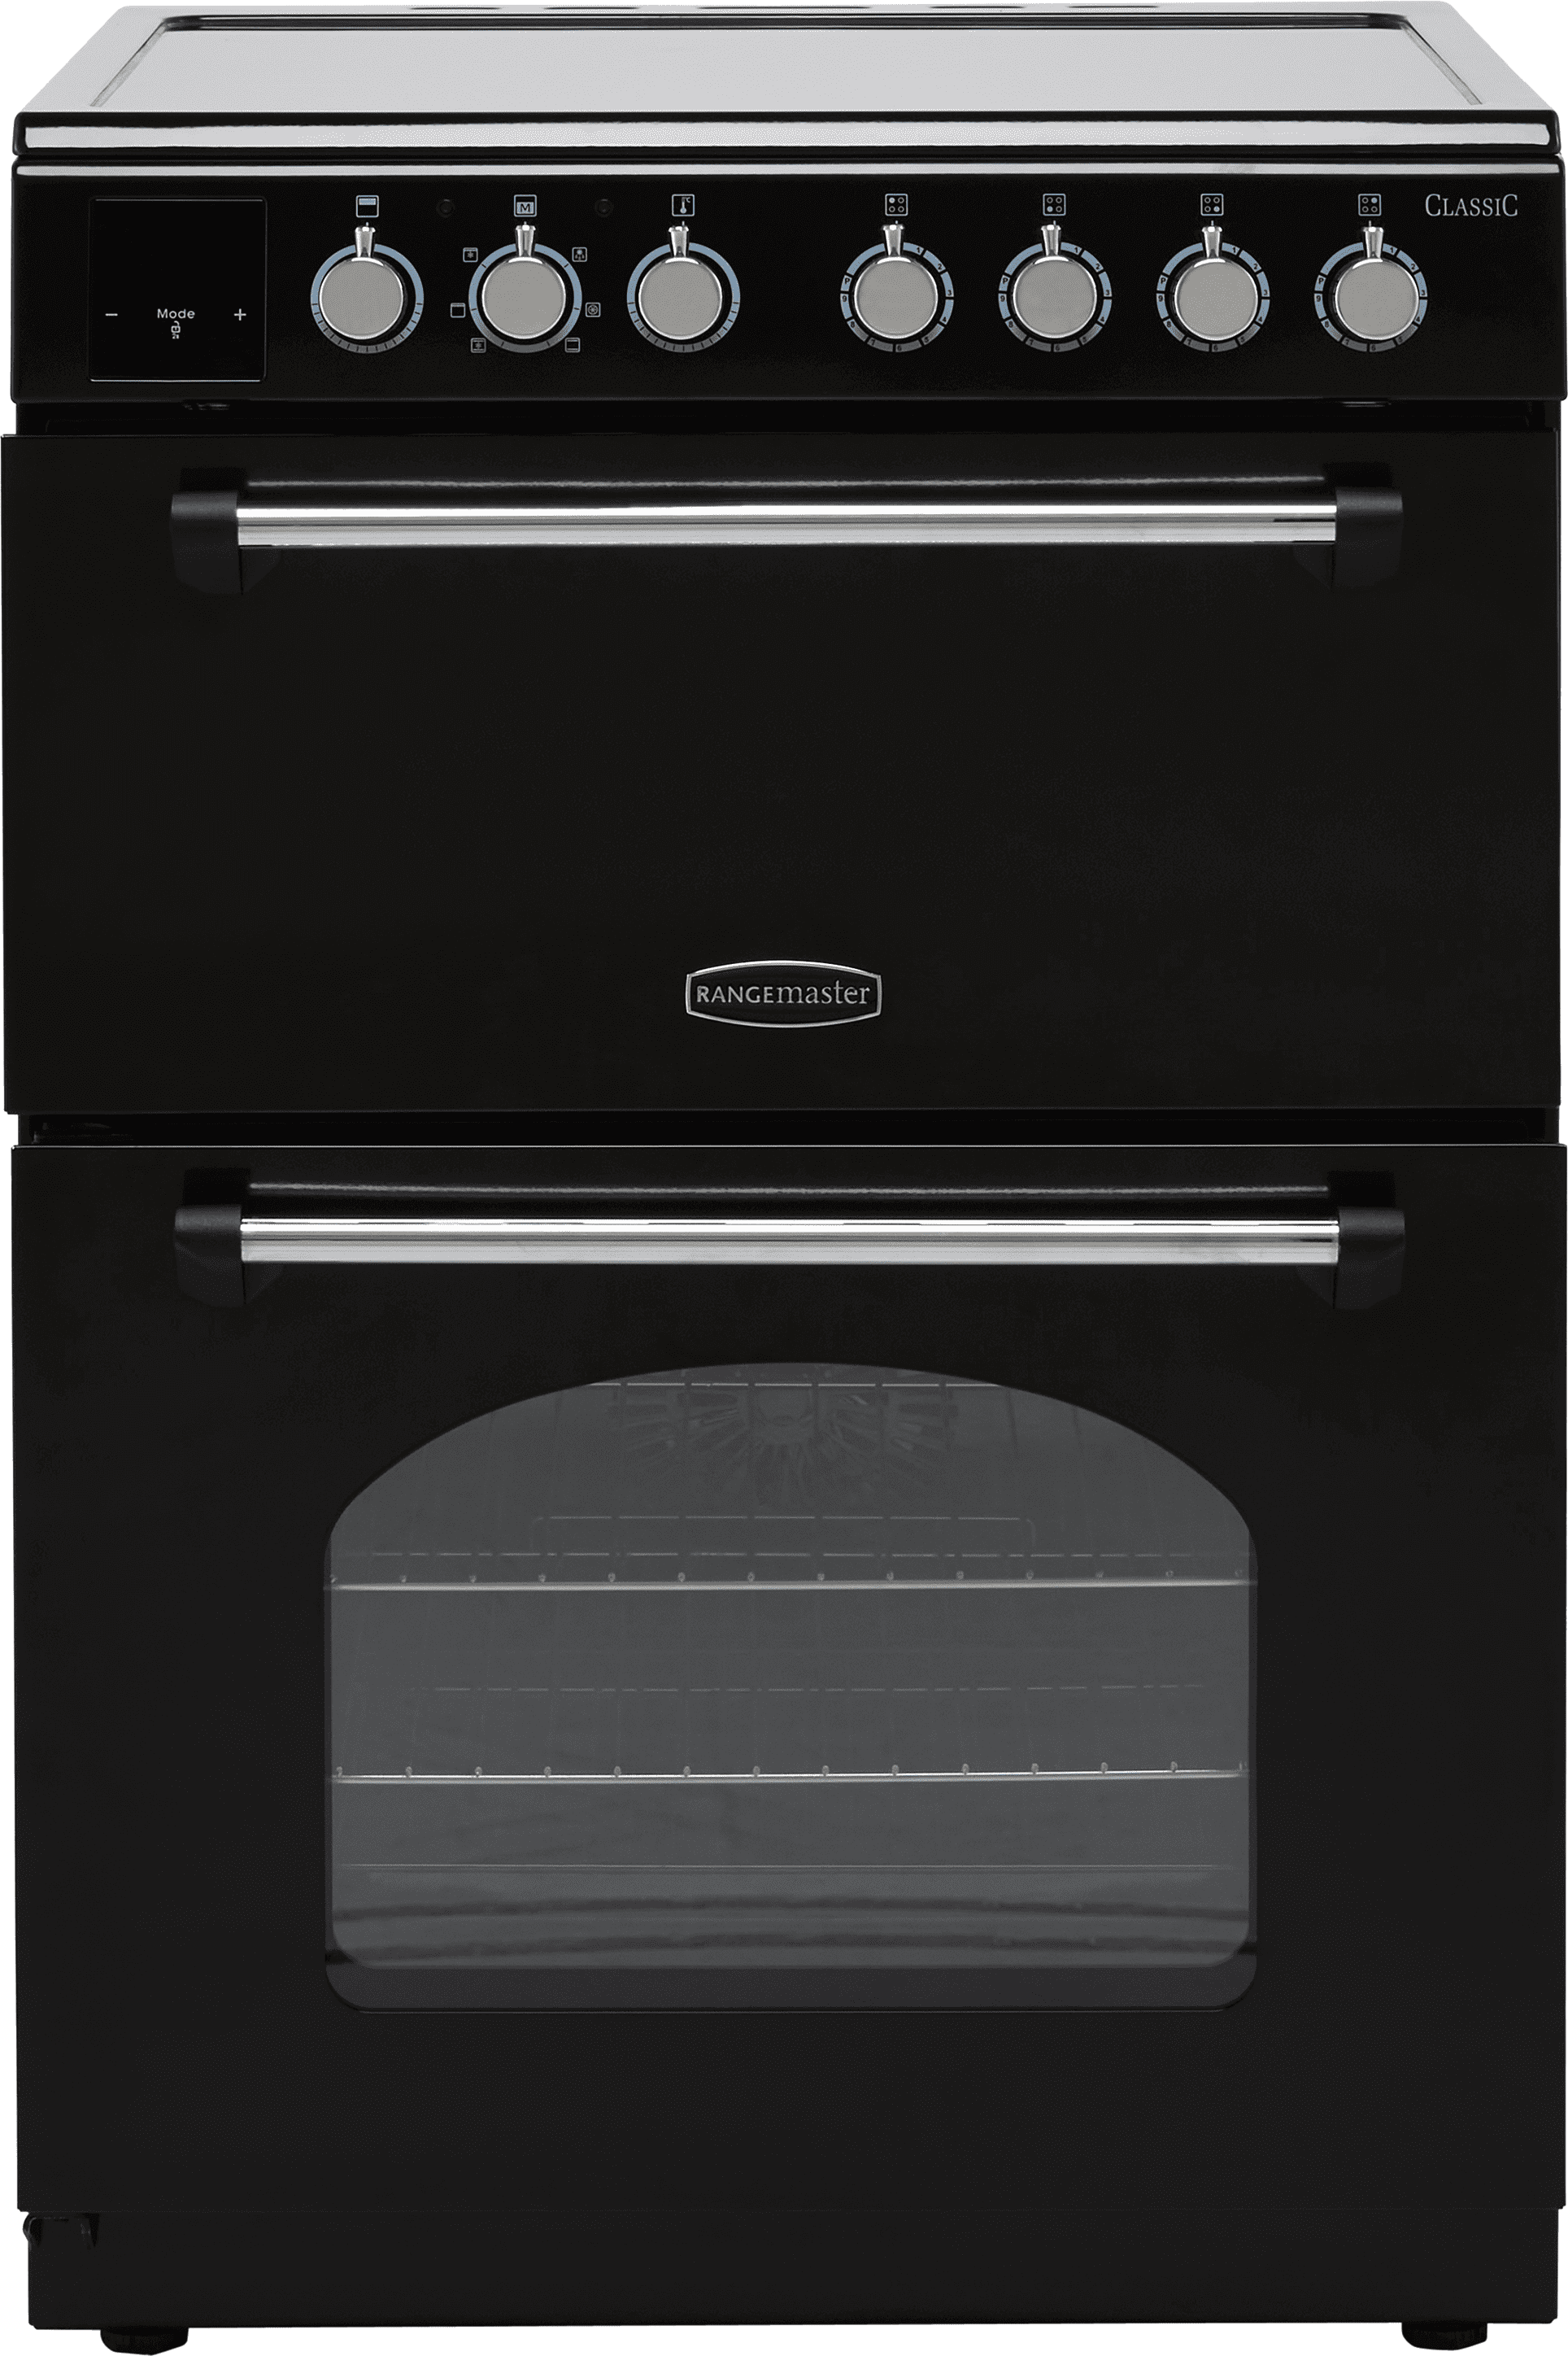 Rangemaster Classic 60 CLA60EIBL/C 60cm Electric Cooker with Induction Hob - Black / Chrome - A/A Rated, Black